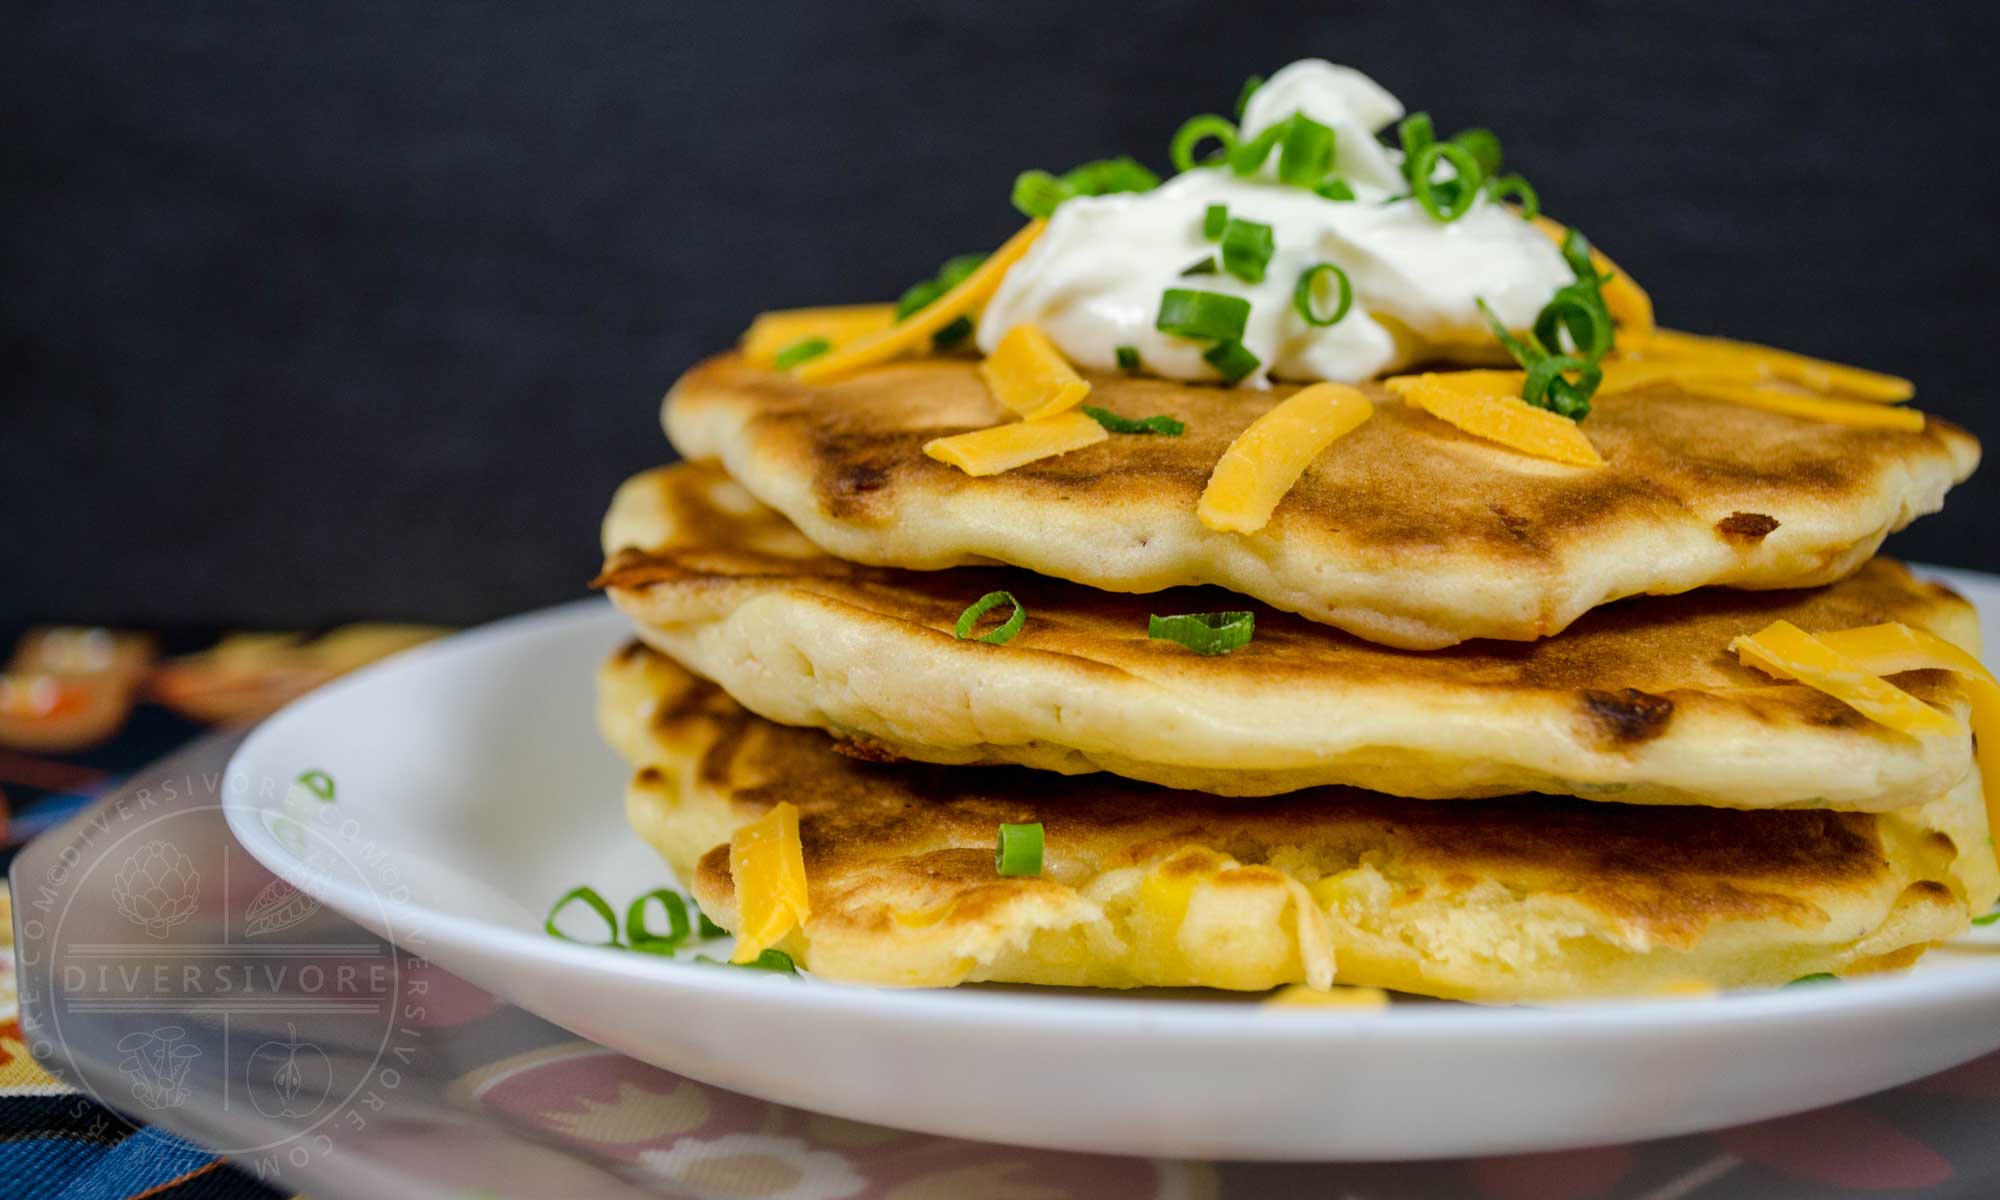 Featured image for “Bacon, Cheddar & Chive Savory Pancakes”